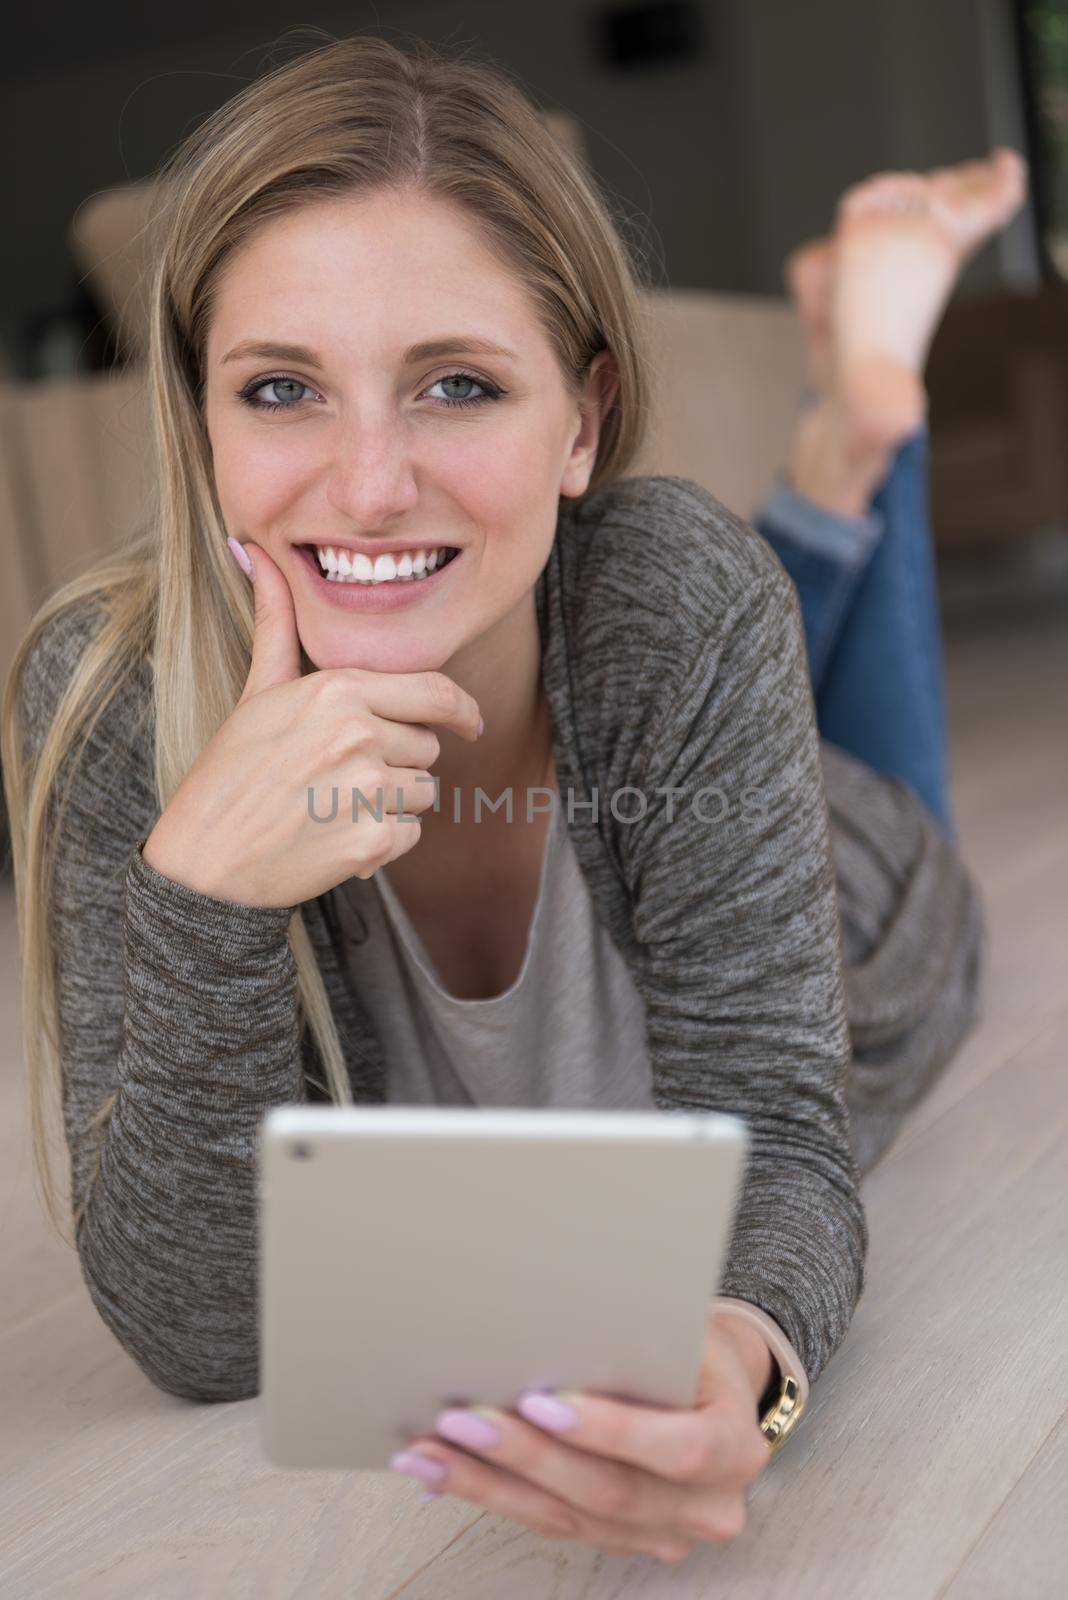 beautiful young women used tablet computer on the floor of her luxury home